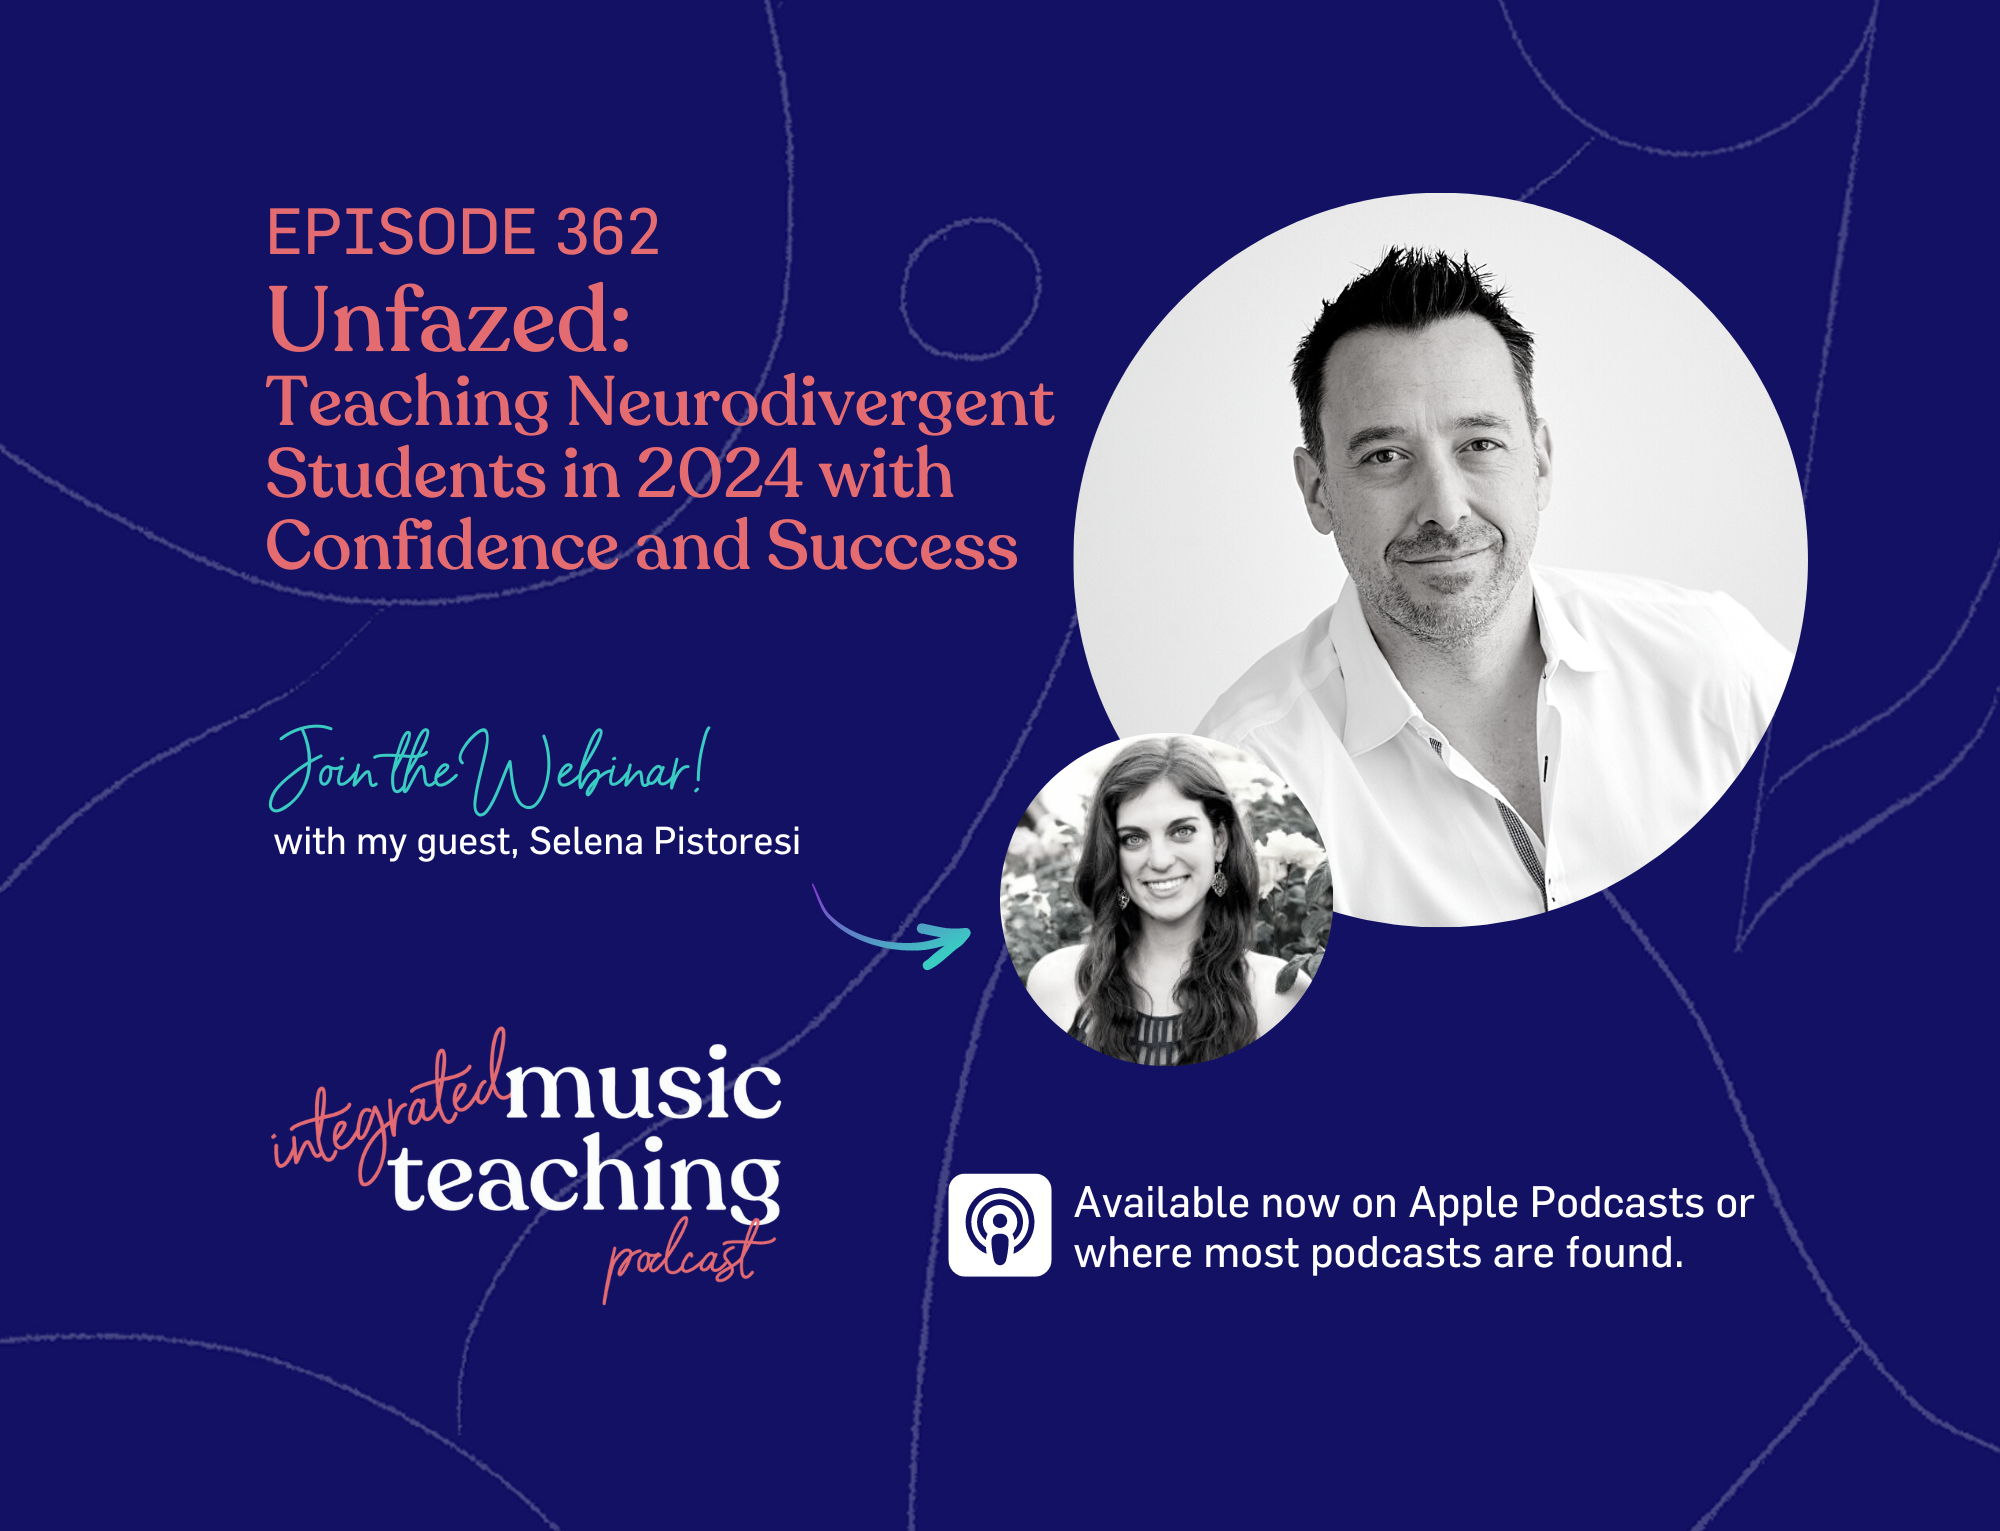 Unfazed: Teaching Neurodivergent Students in 2024 with Confidence and Success